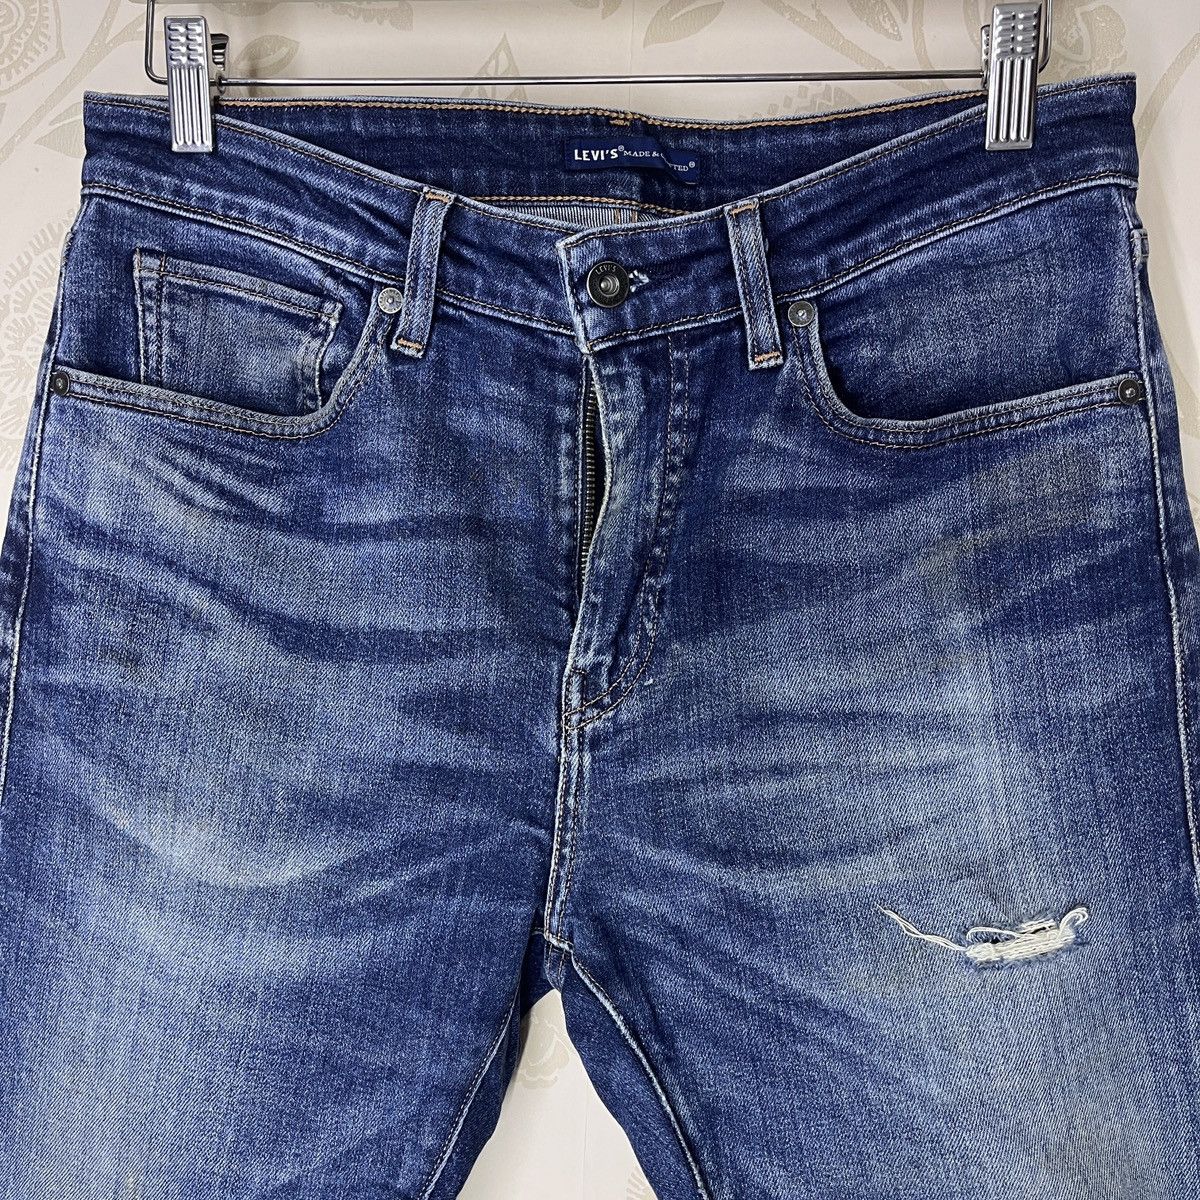 Levis Made & Crafted Blue Label Distressed Denim Jeans - 5